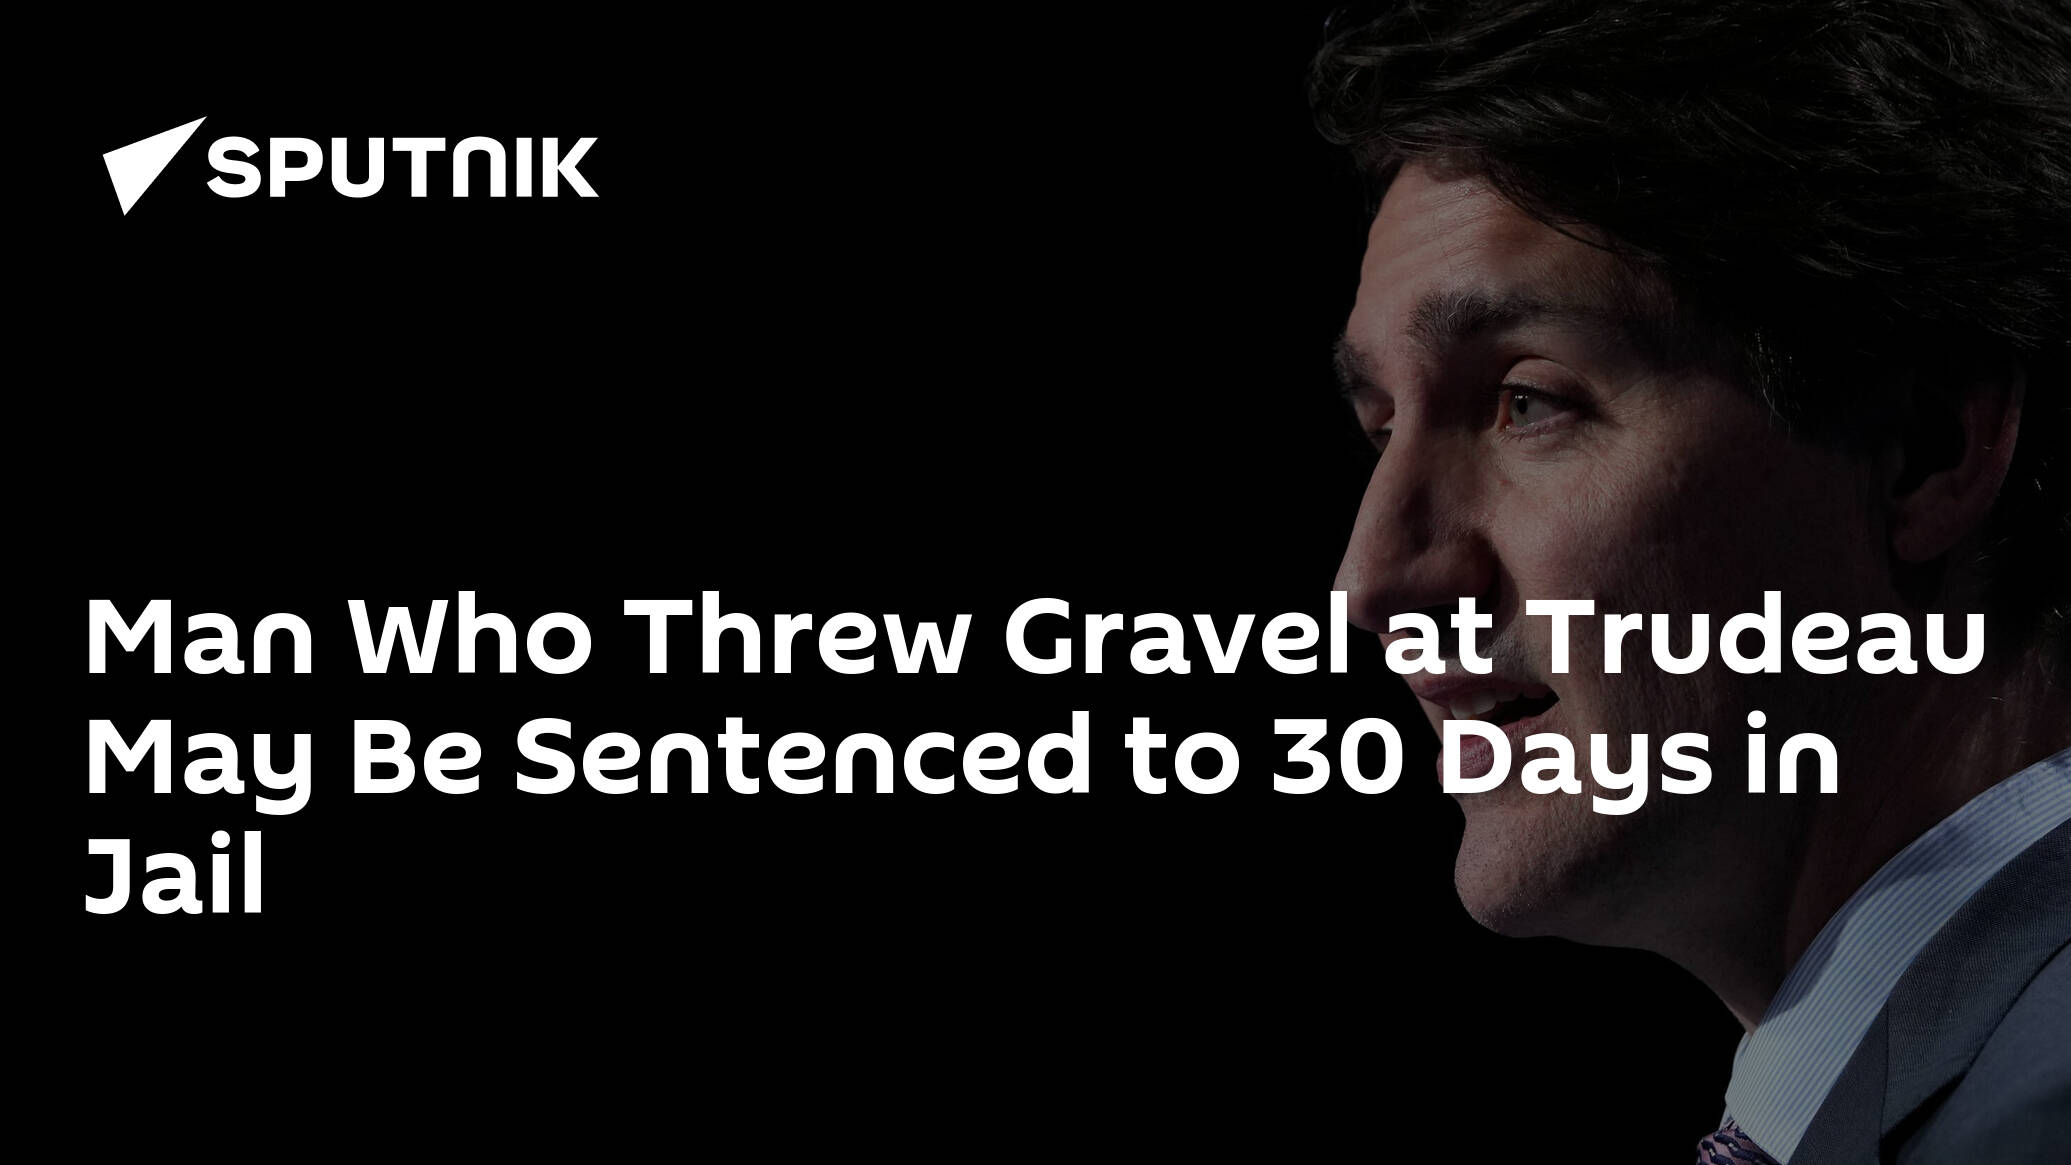 Man Who Threw Gravel at Trudeau May Be Sentenced to 30 Days in Jail